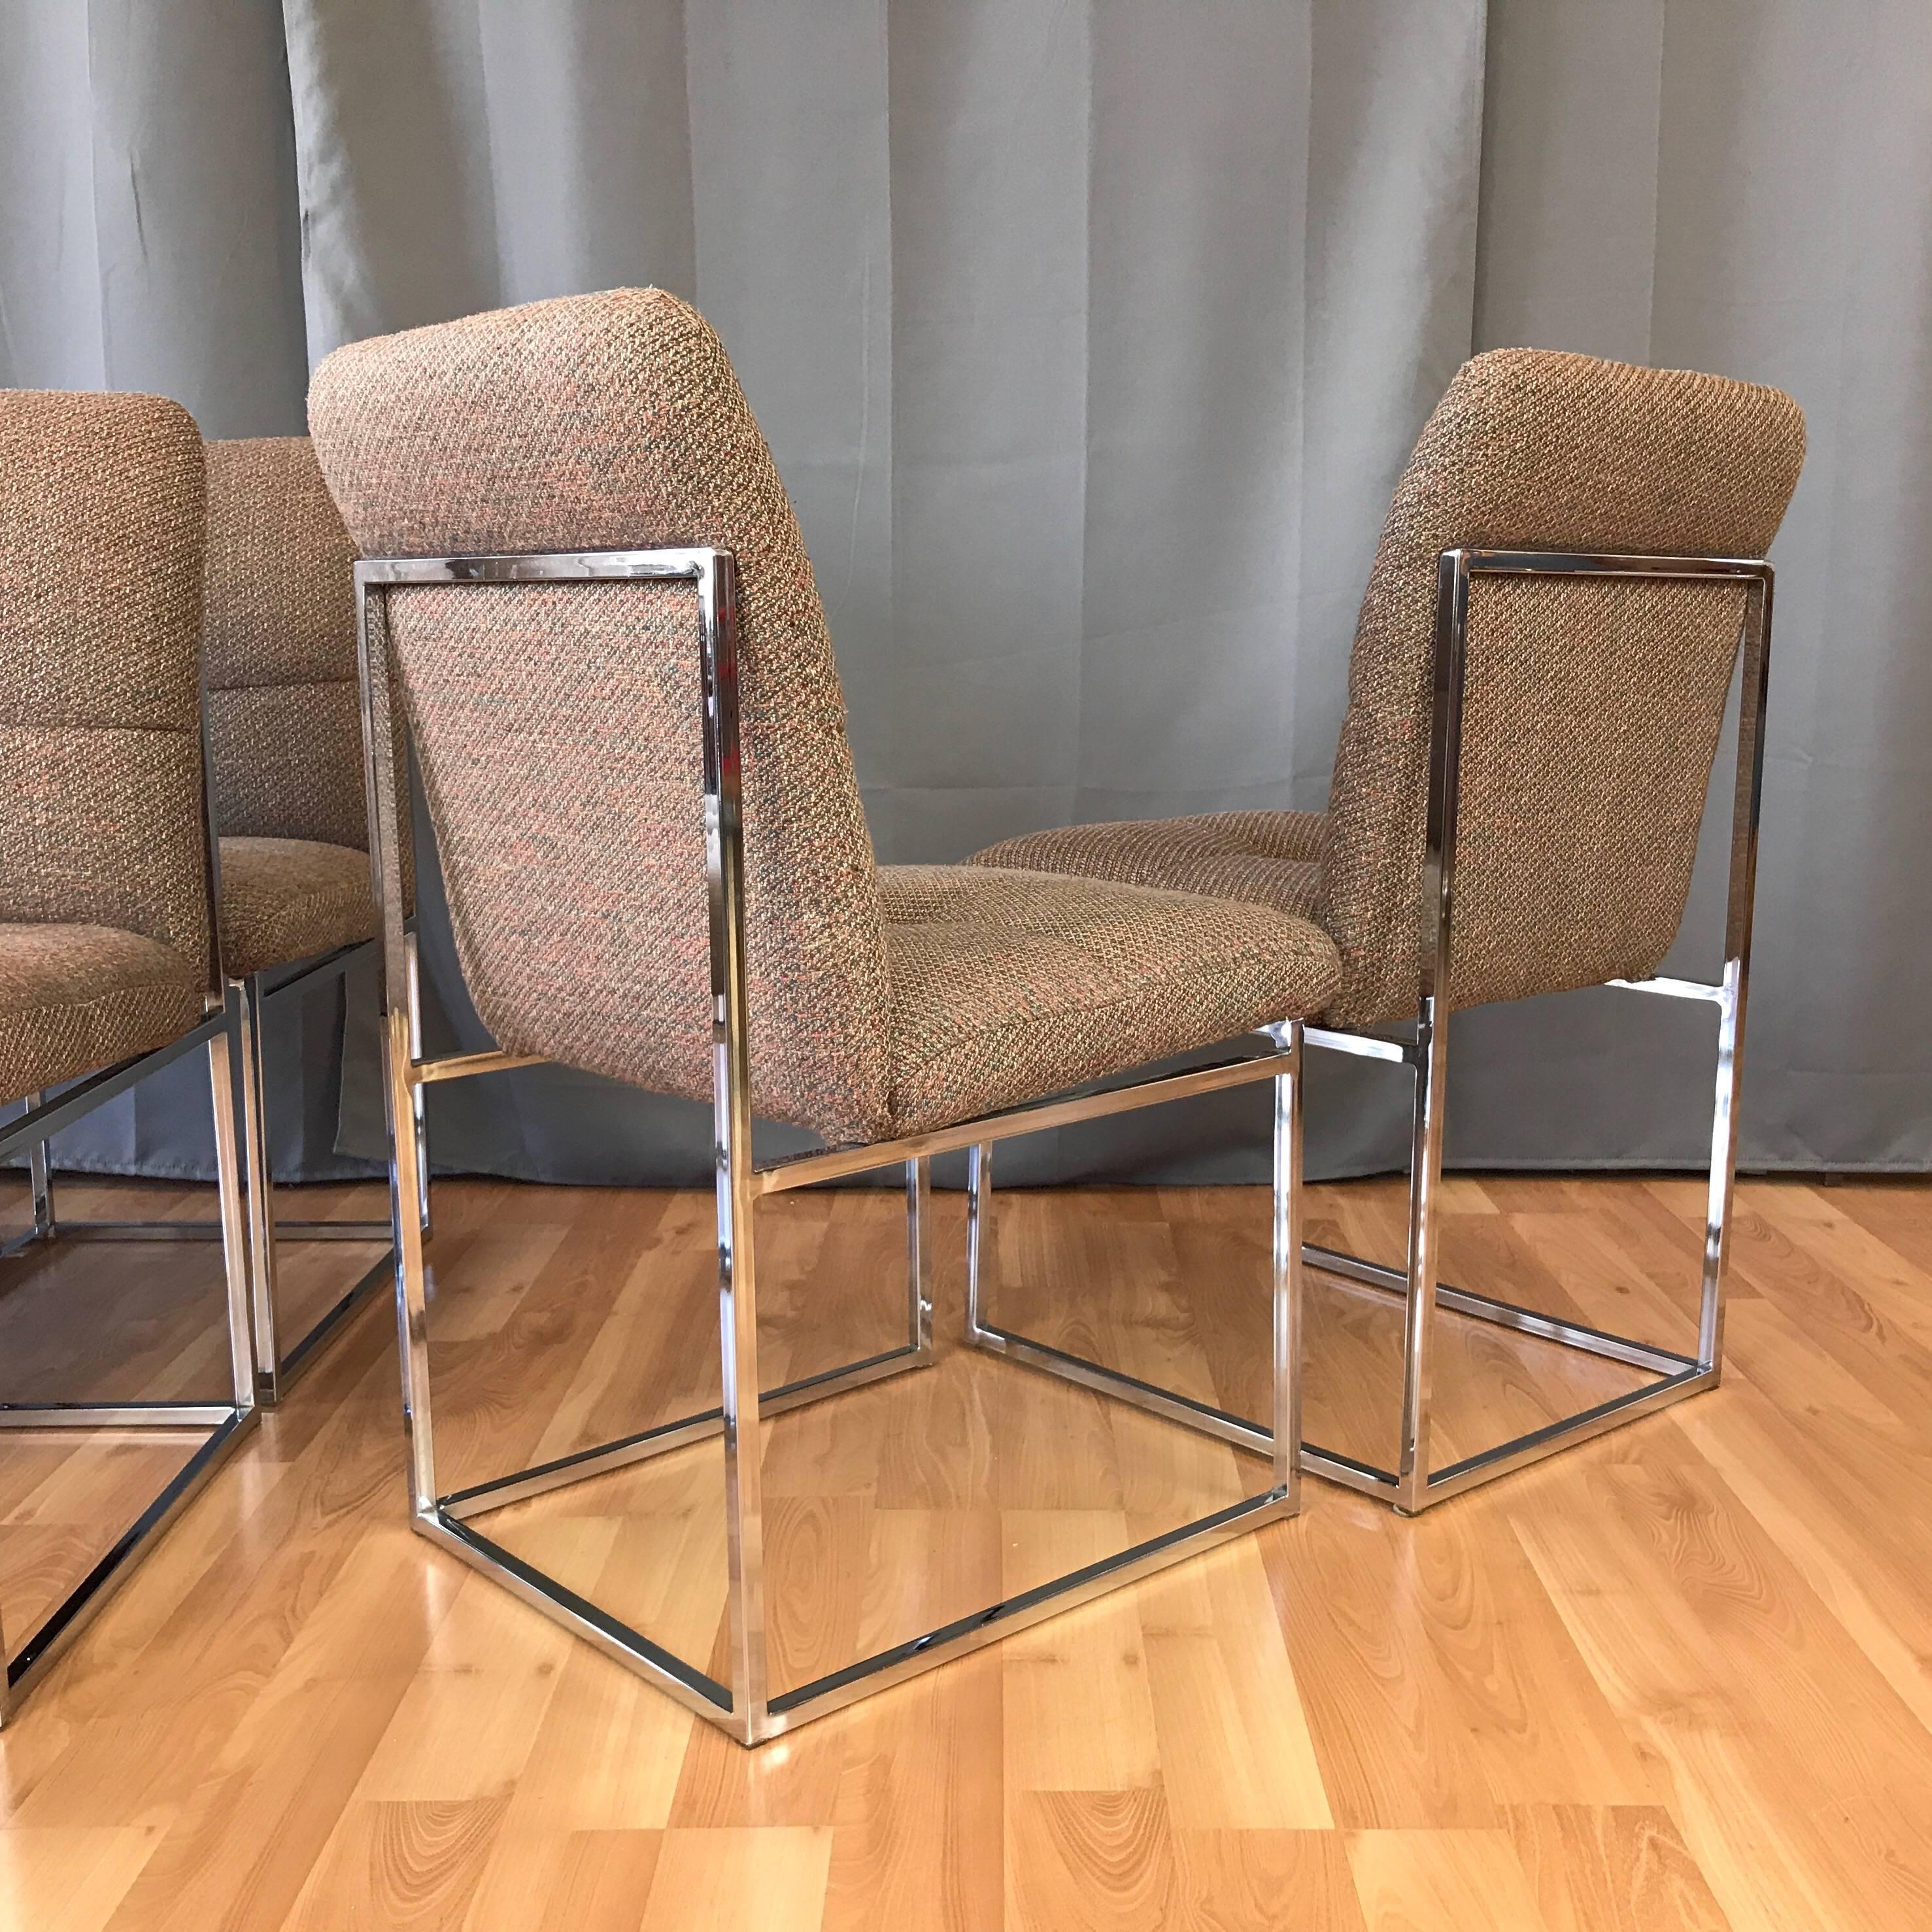 Upholstery Milo Baughman for Thayer Coggin Set of Six Dining Chairs